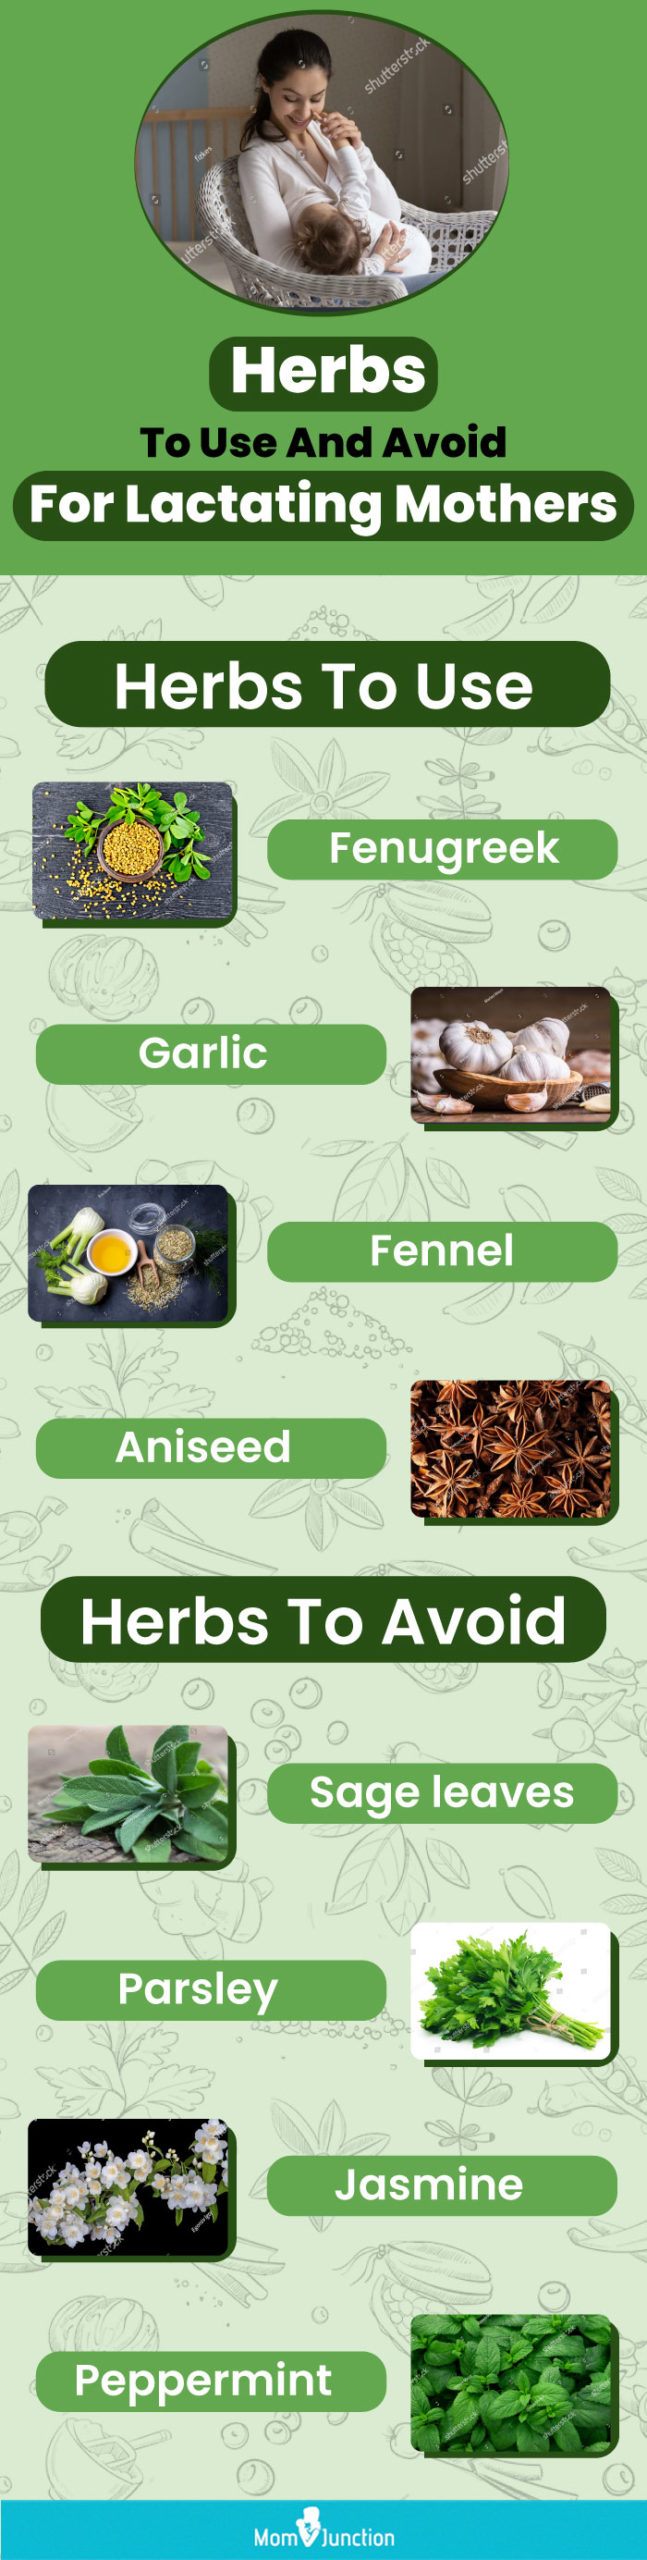 herbs to use and avoid for lactating mothers [infographic]